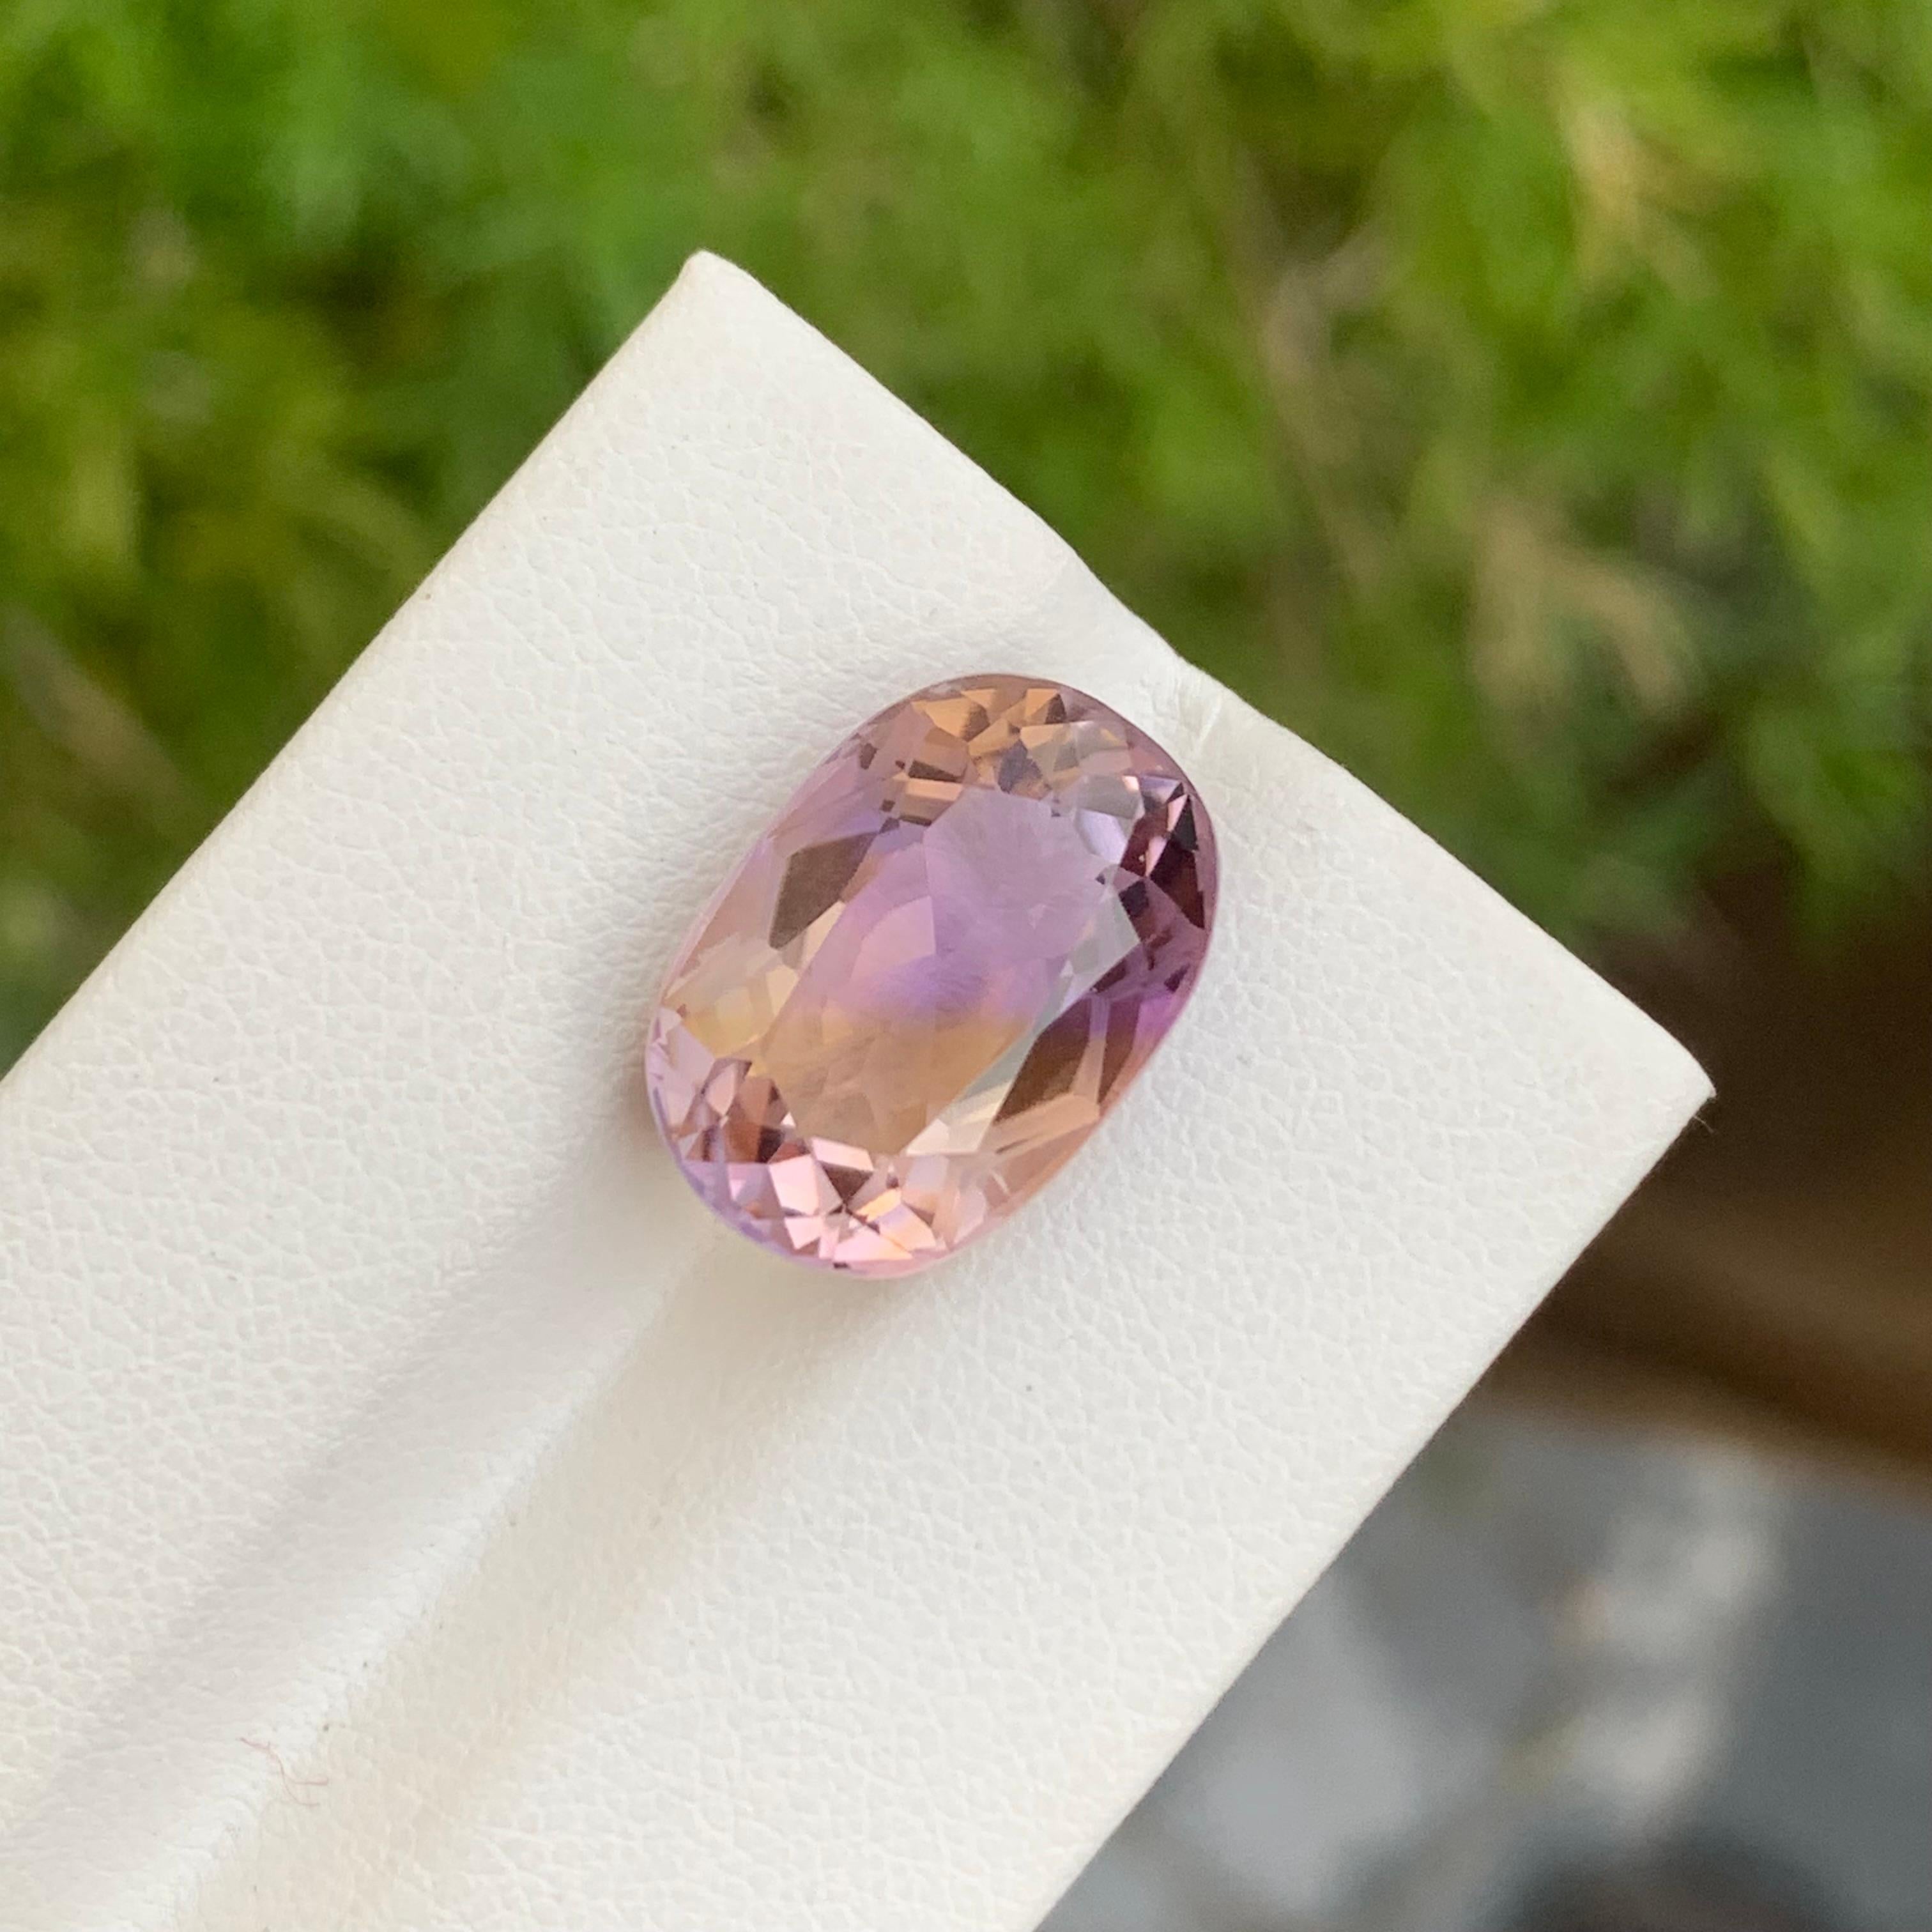 Faceted Ametrine
Weight: 10.00 Carats
Dimension; 16.1 x 11.2 x 8.6 Mm
Origin: Brazil
Color: Purple & Yellow
Shape: Oval 
Treatment: Non
Certficate: On Demand
.
Ametrine is a unique and captivating gemstone that displays a harmonious blend of two